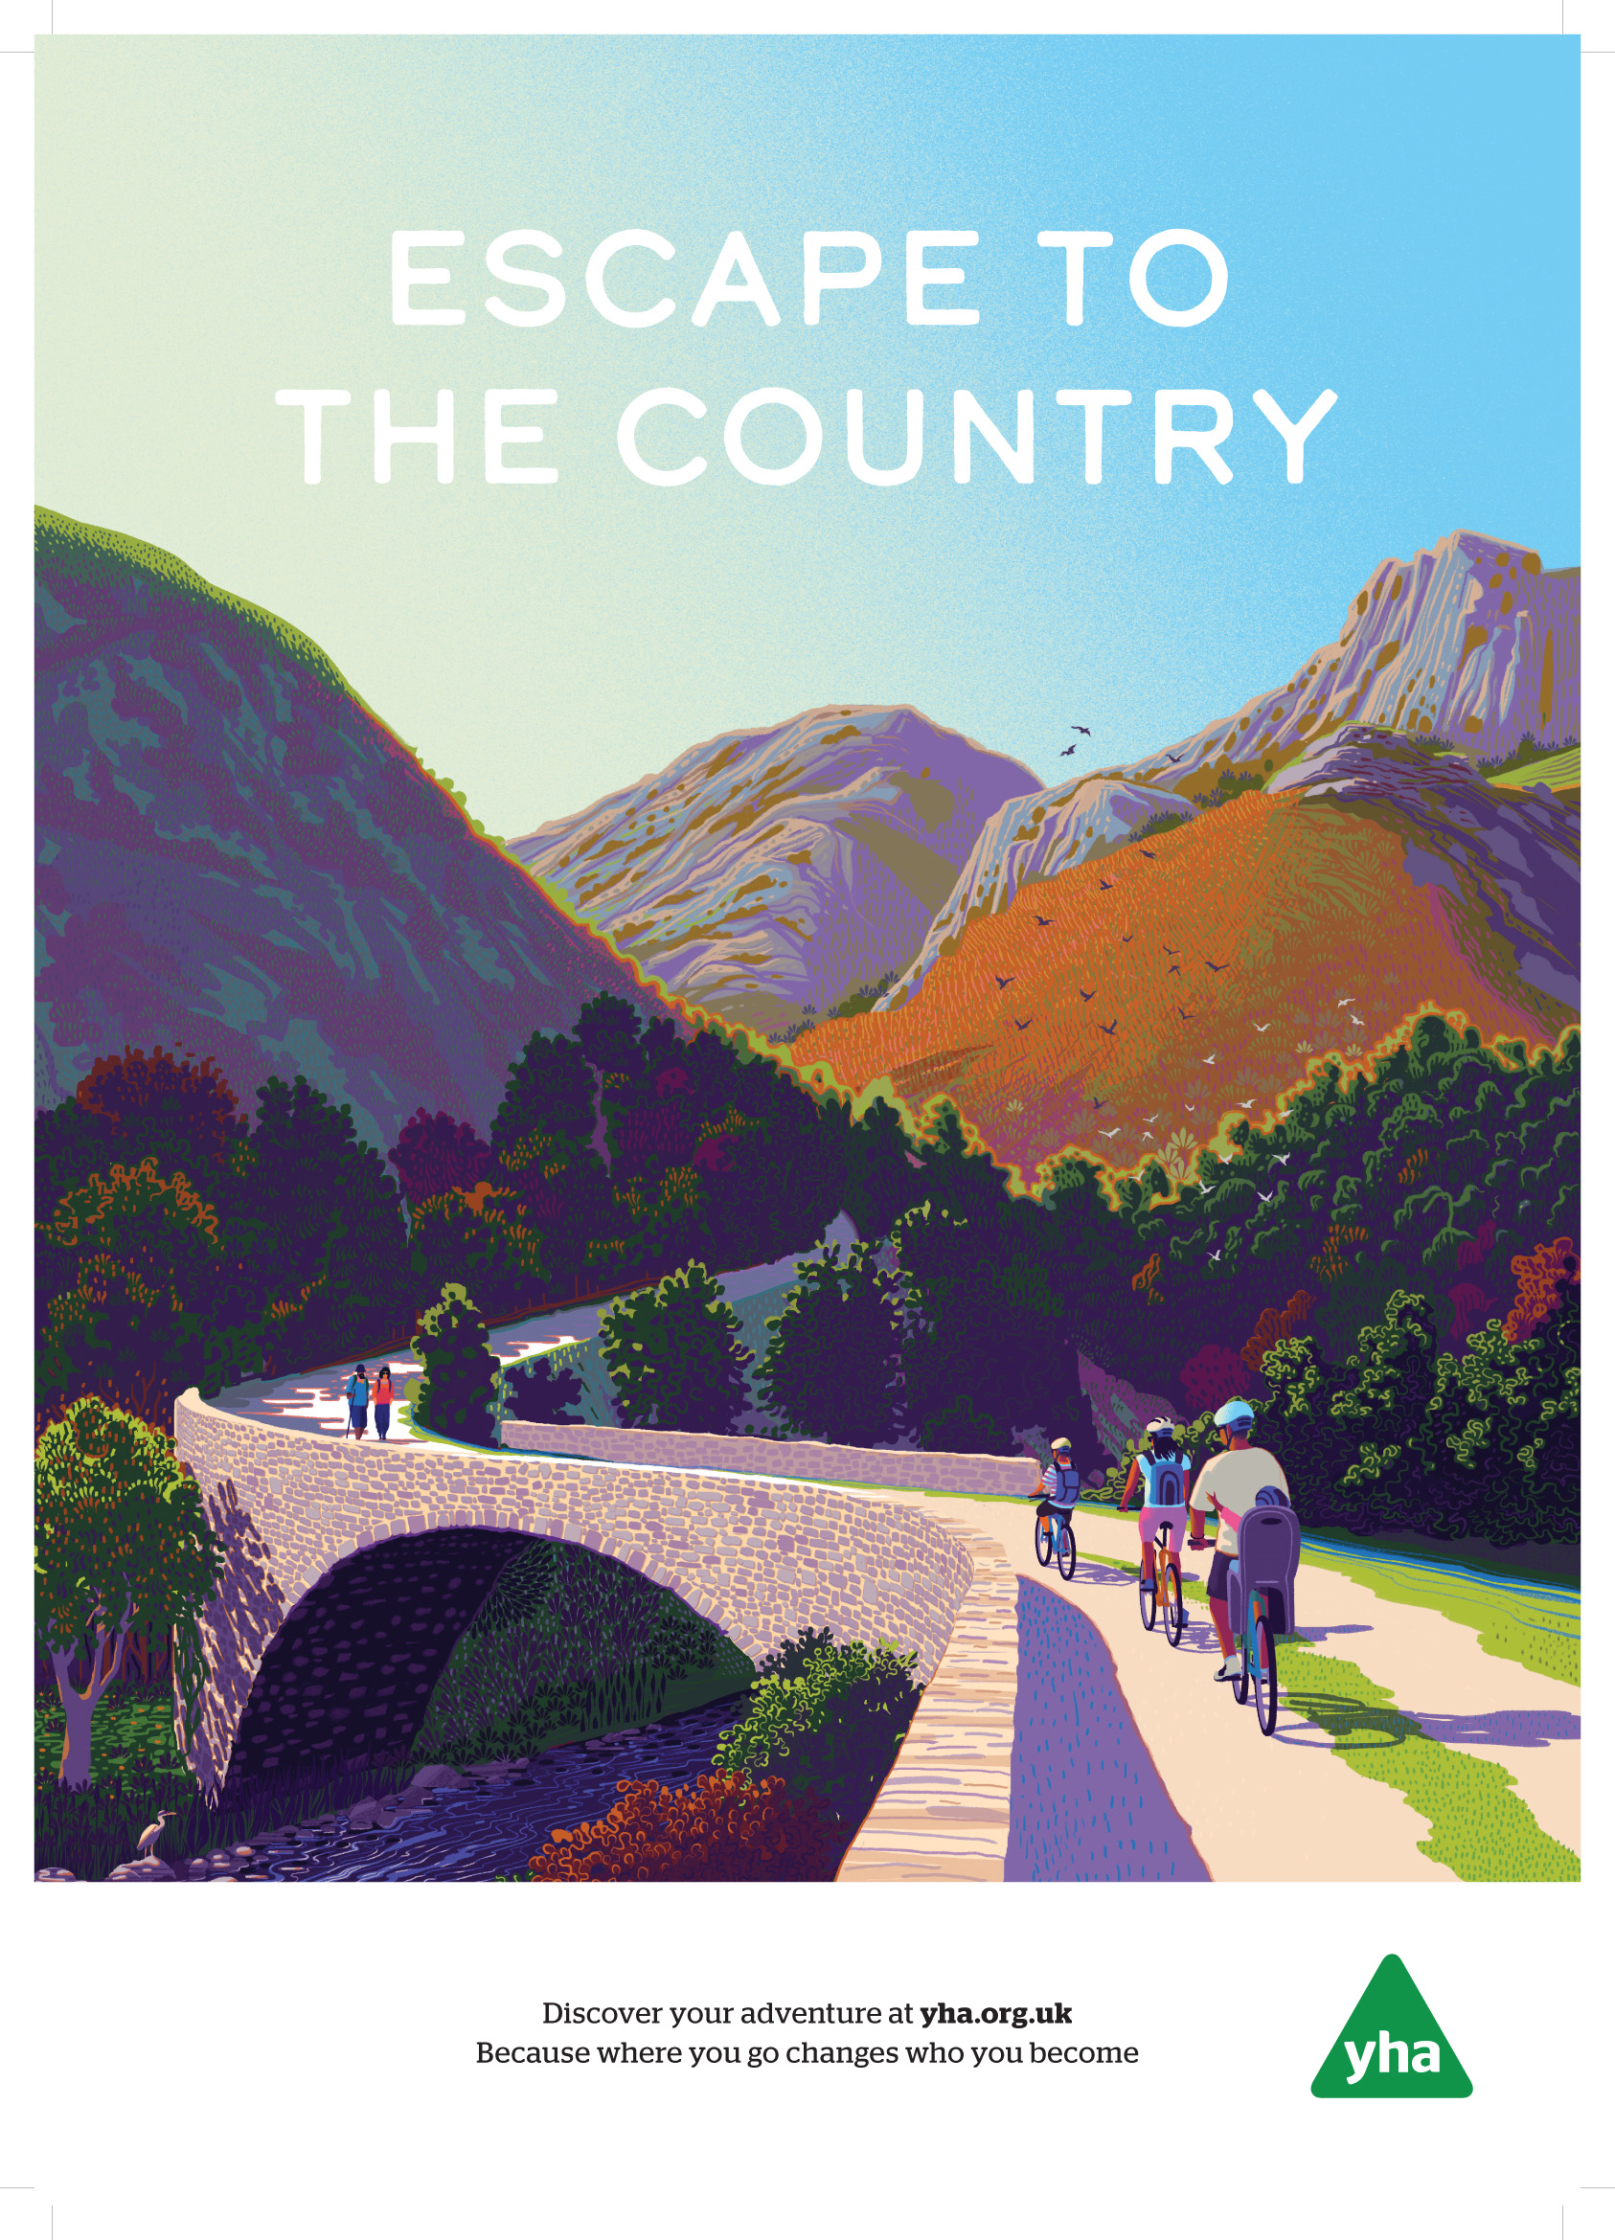 YHA_Discover_Poster_A2_EscapeToTheCountry_AW.jpg